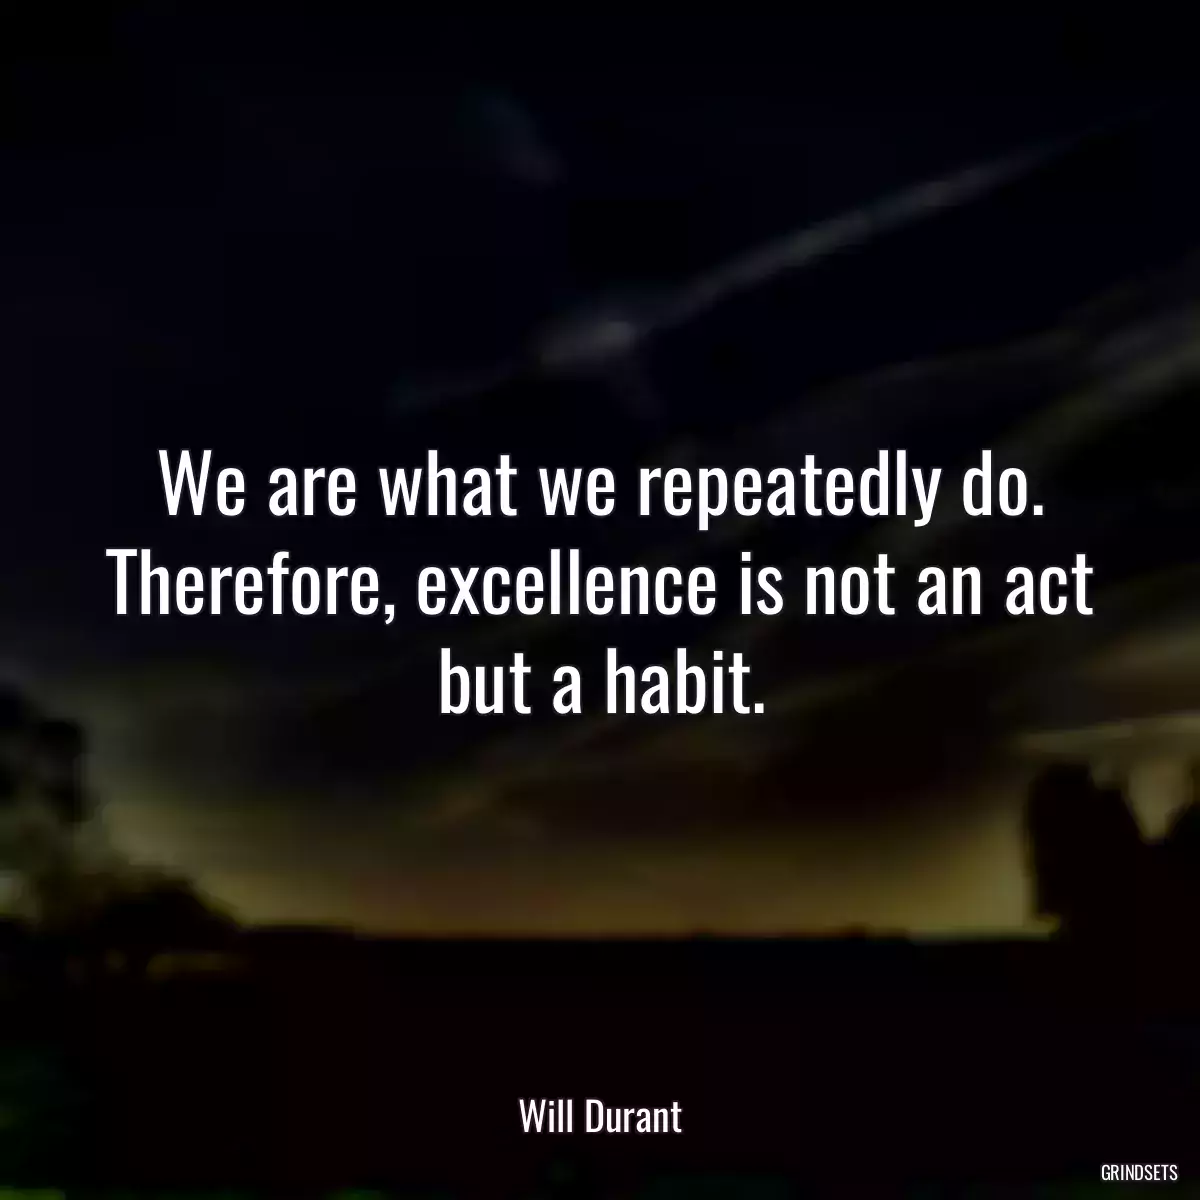 We are what we repeatedly do. Therefore, excellence is not an act but a habit.